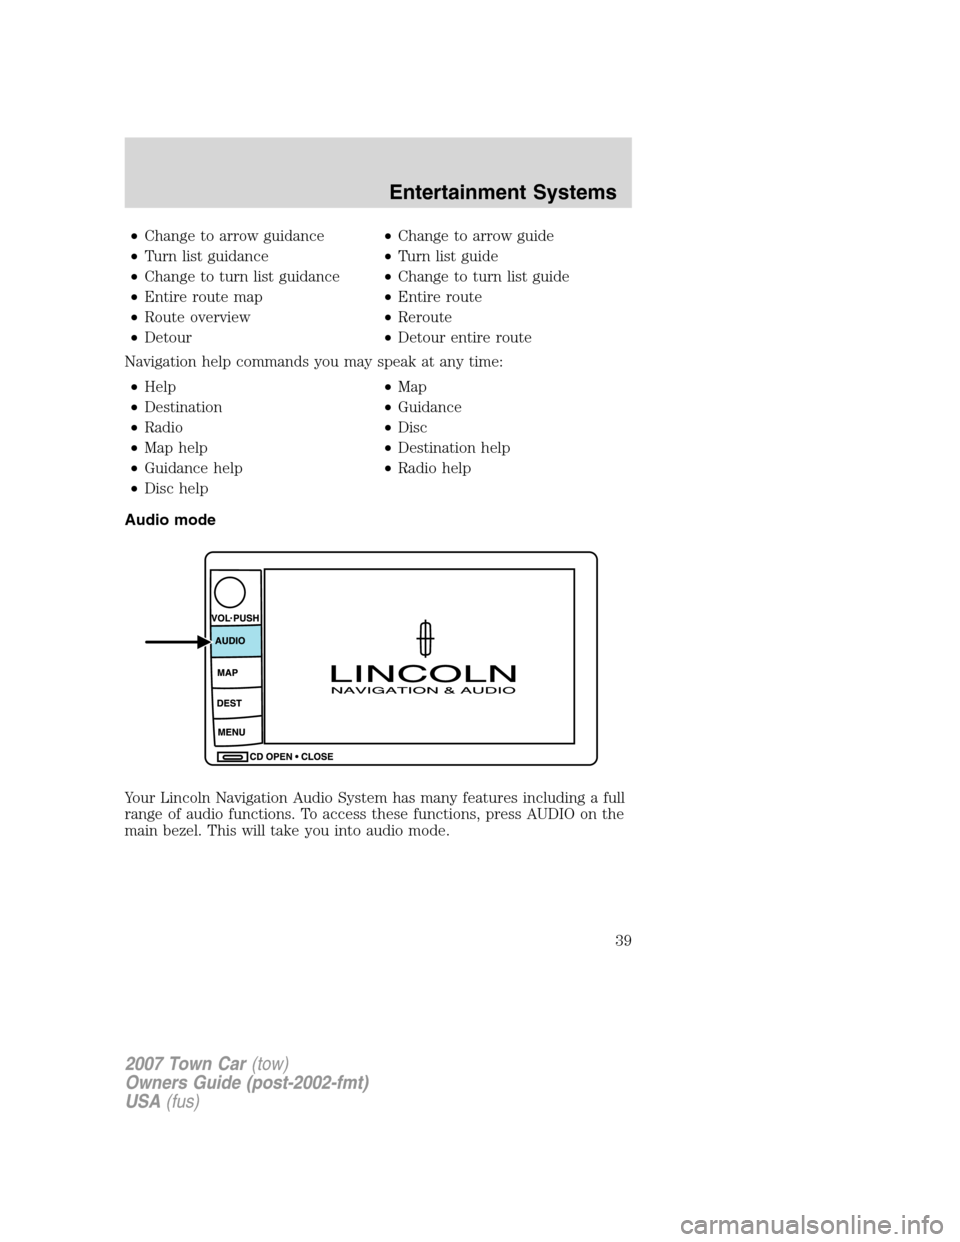 LINCOLN TOWN CAR 2007  Owners Manual •Change to arrow guidance•Change to arrow guide
•Turn list guidance•Turn list guide
•Change to turn list guidance•Change to turn list guide
•Entire route map•Entire route
•Route over